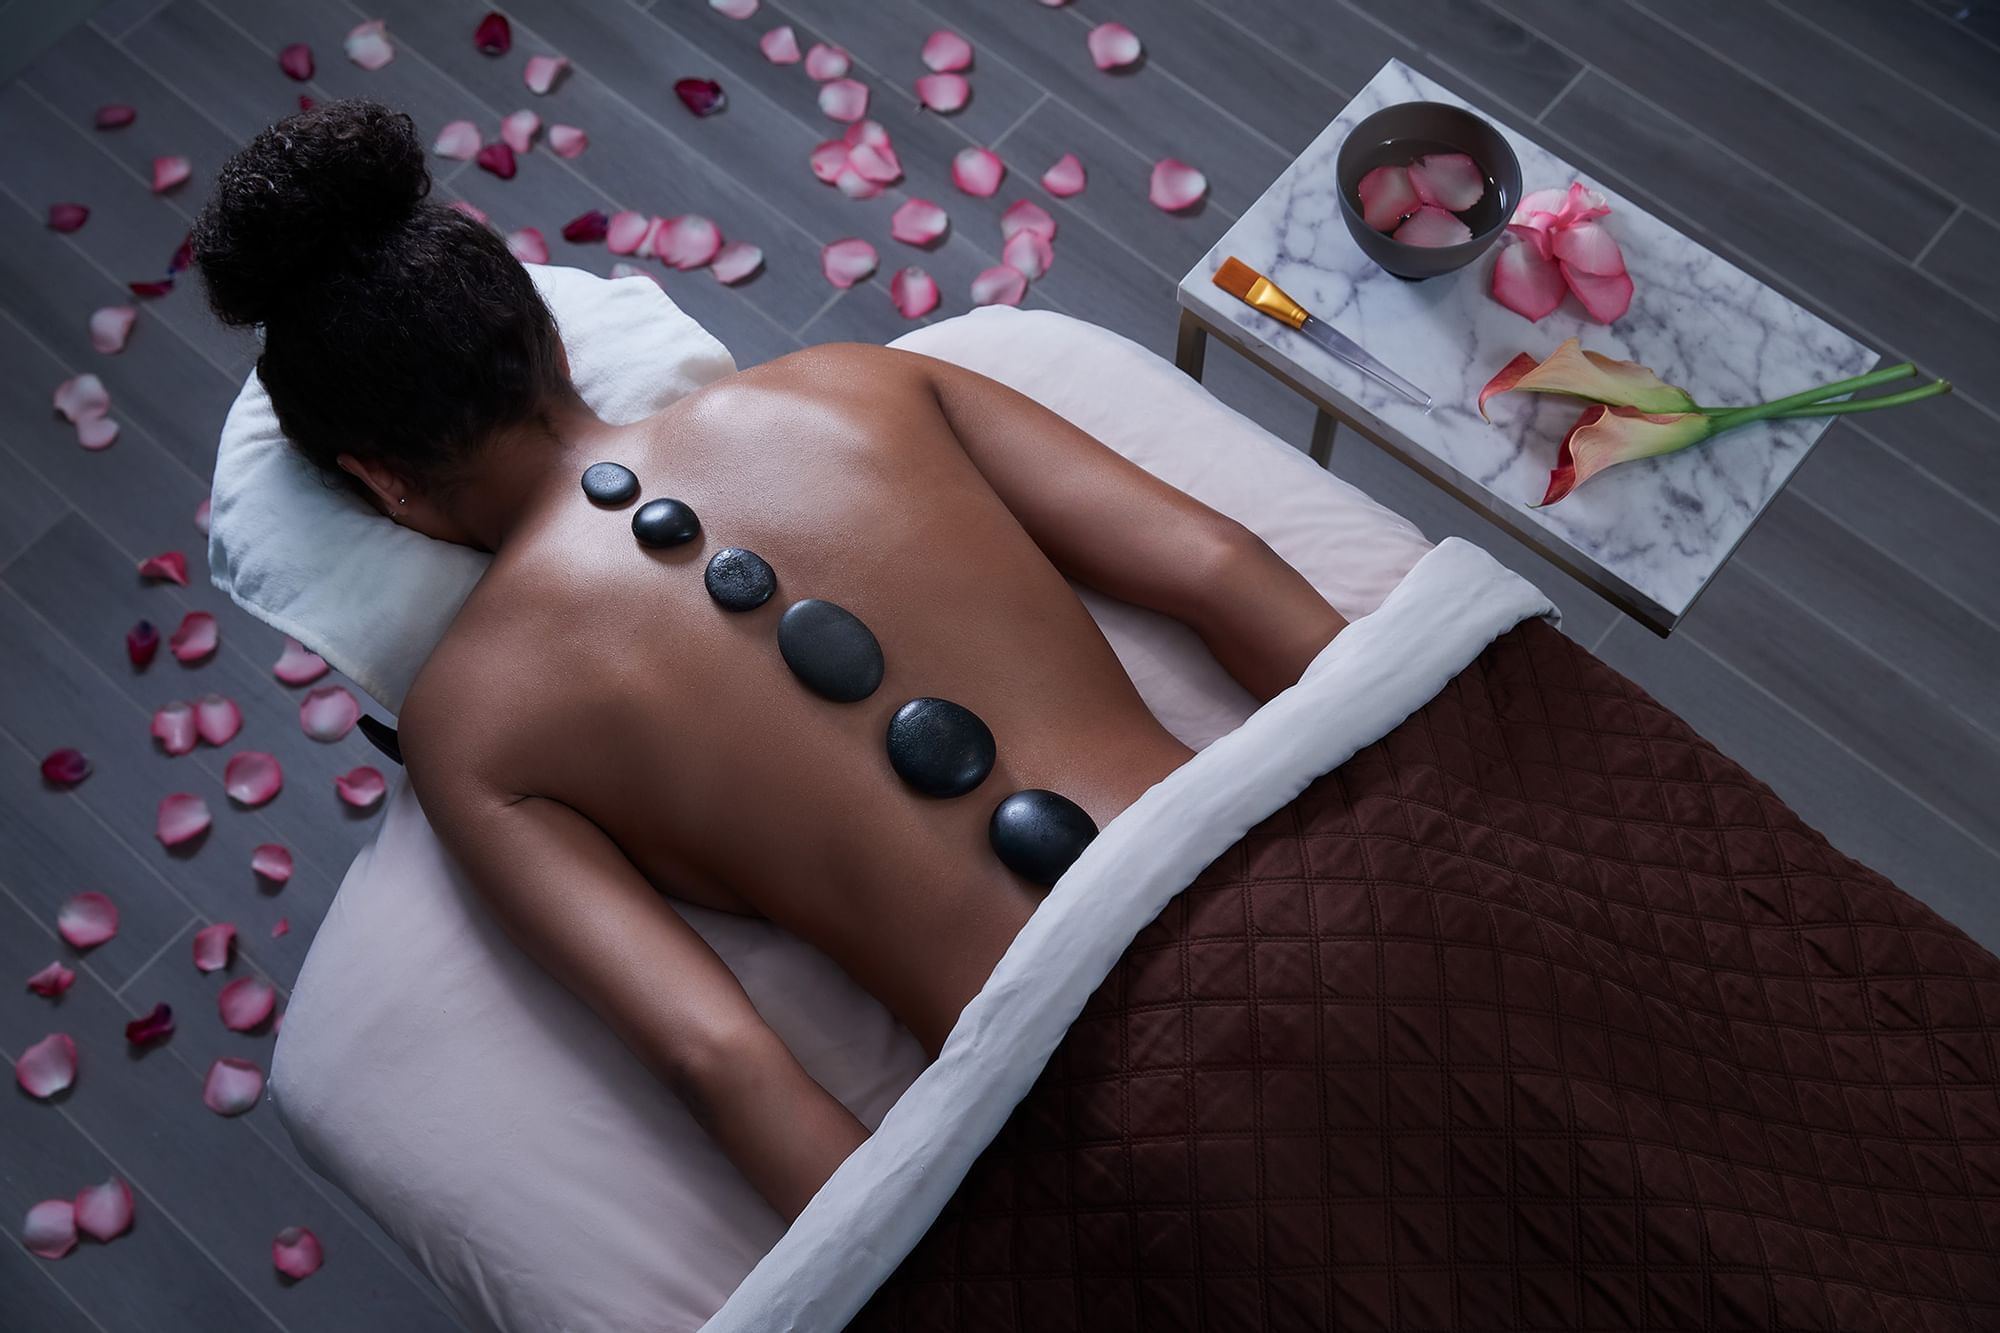 Hot Stone Massage in Feathers Spa at The Peabody Memphis